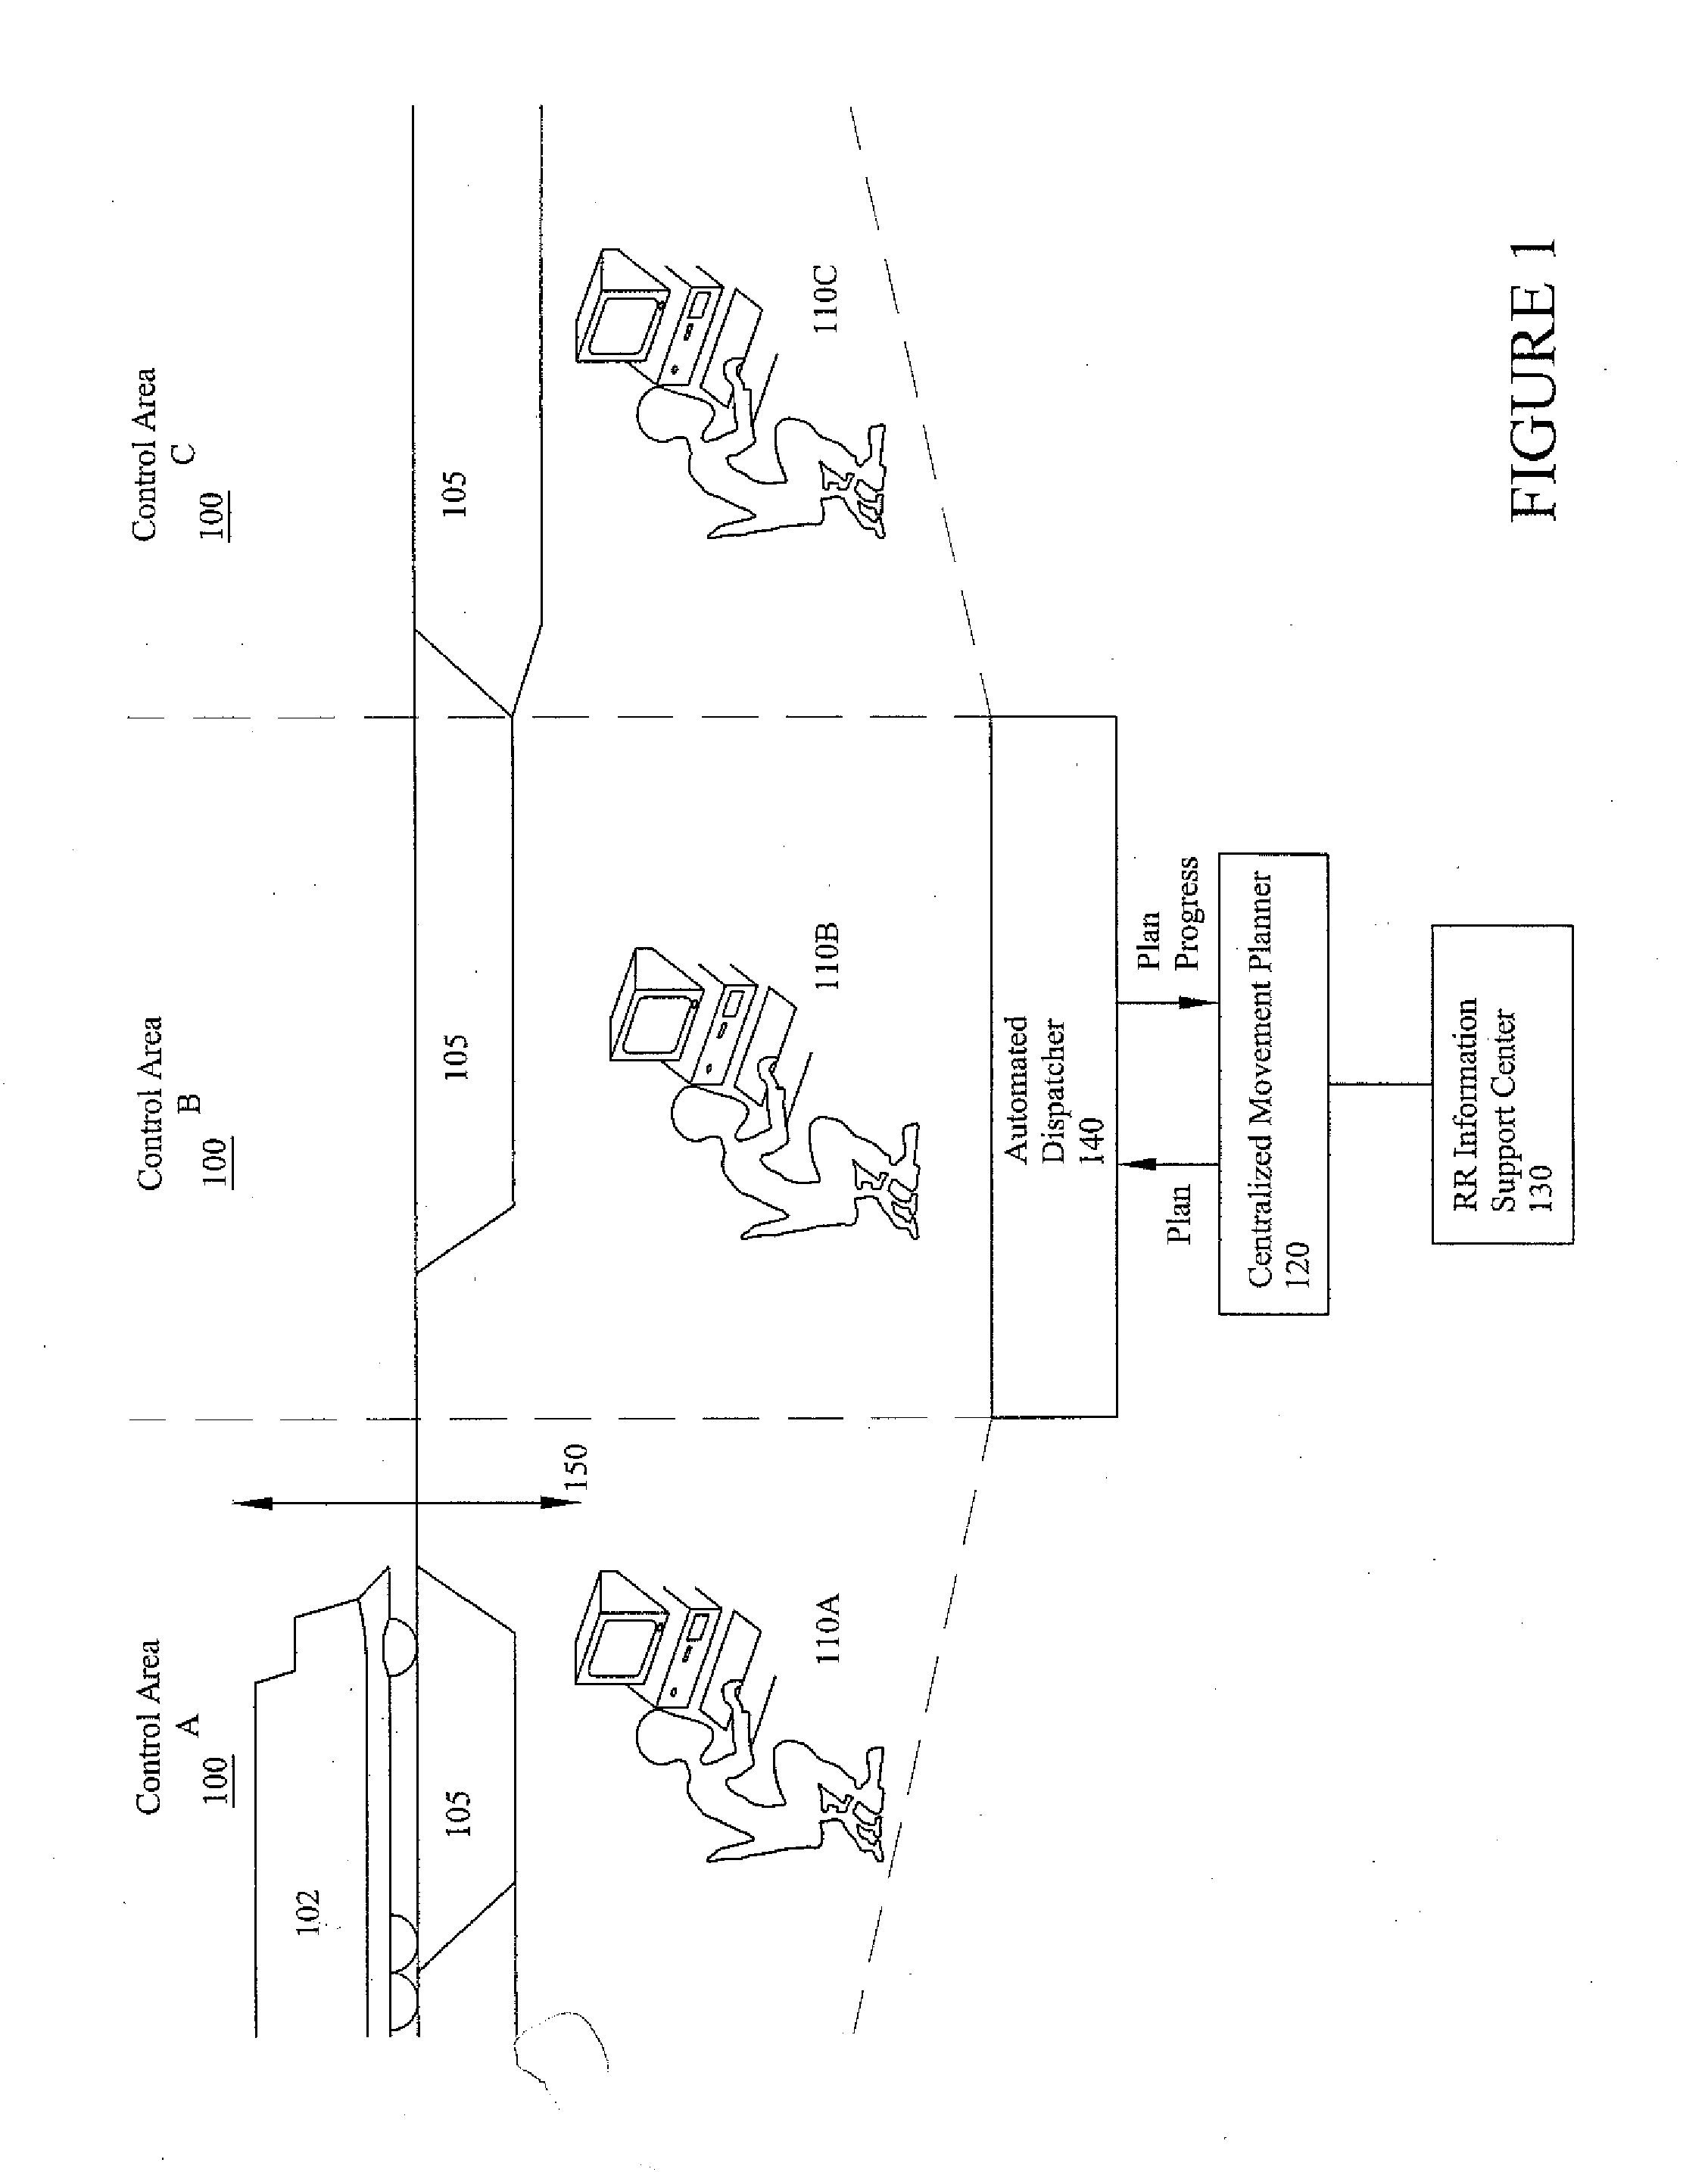 Method and apparatus for automatic selection of alternative routing through congested areas using congestion prediction metrics